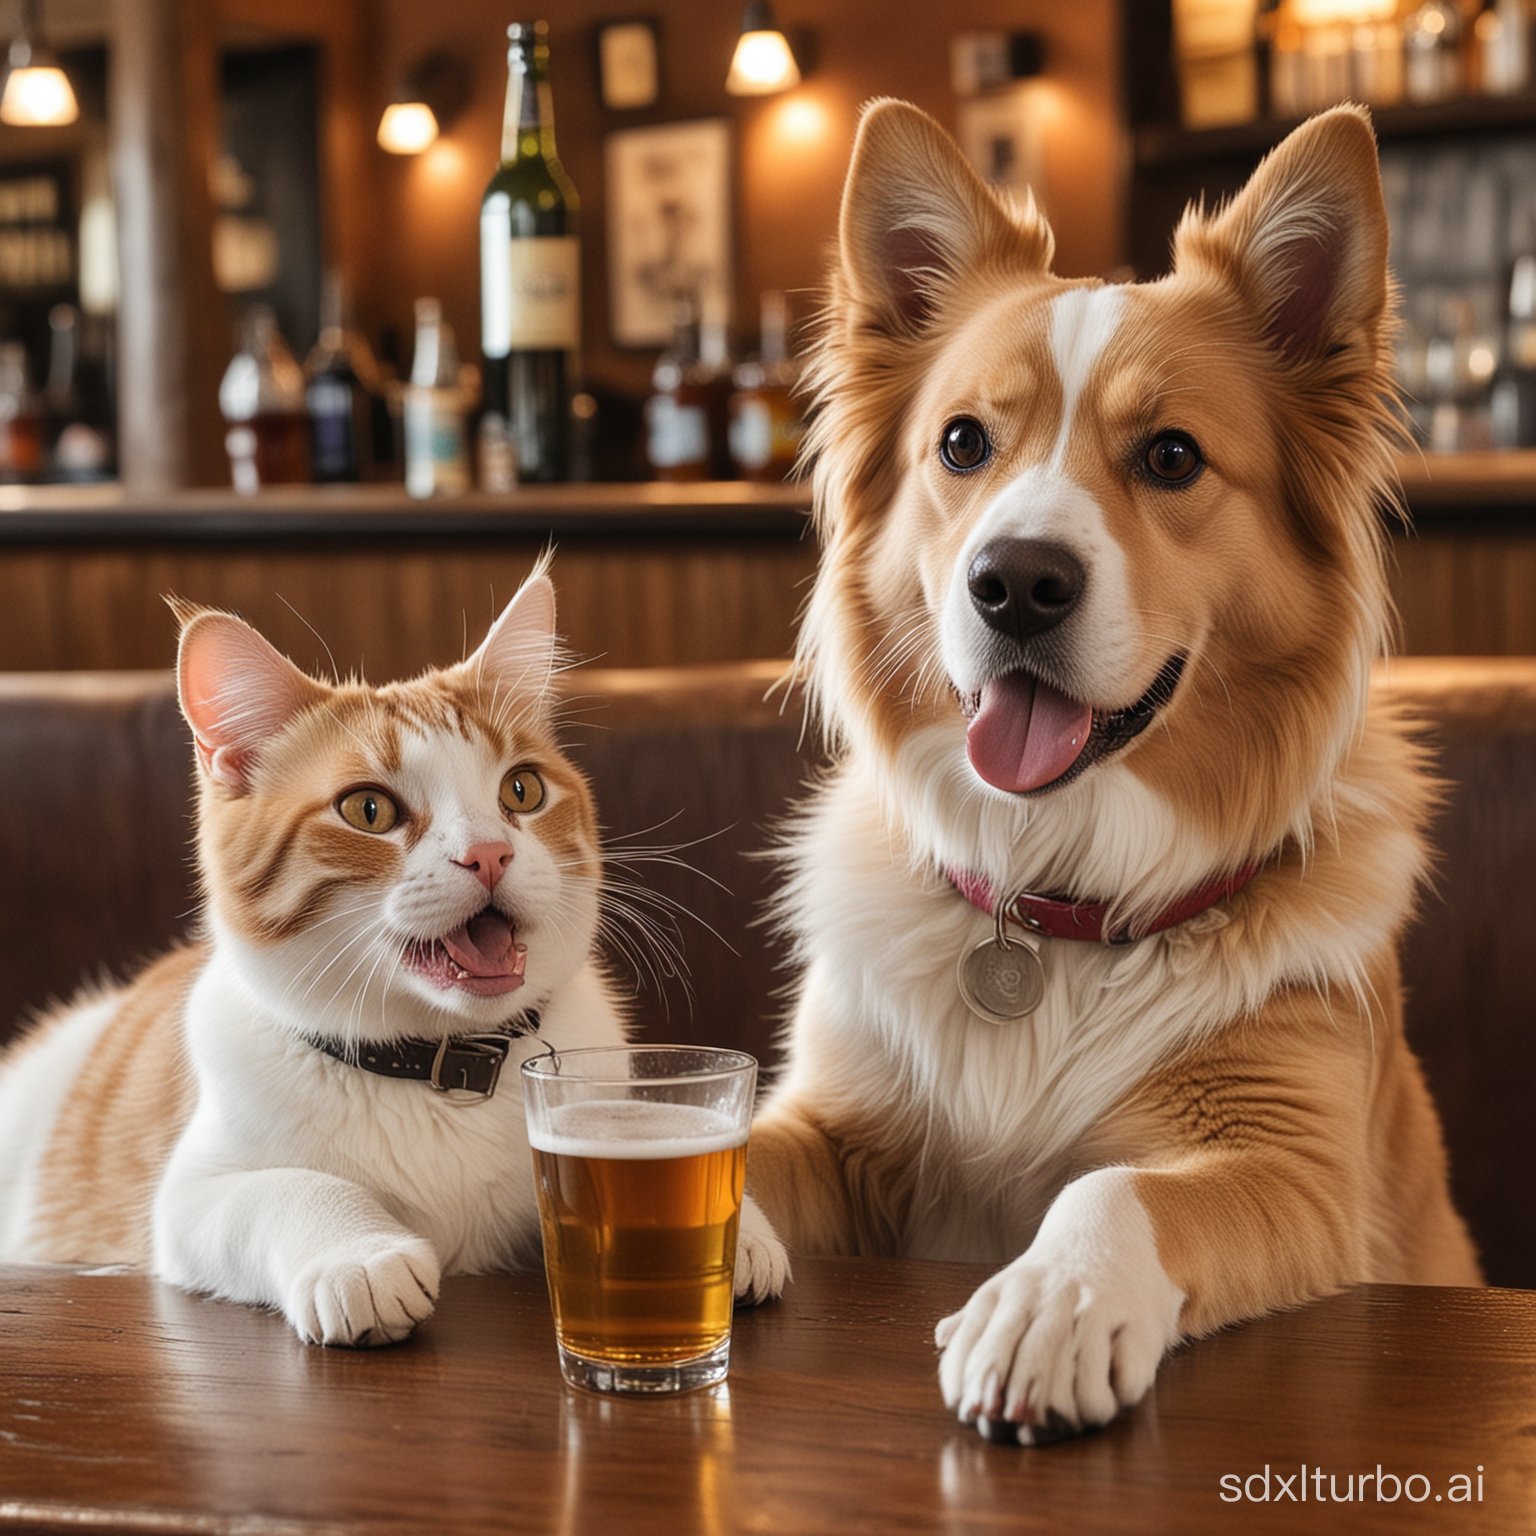 Cat and dog having good time at pub.